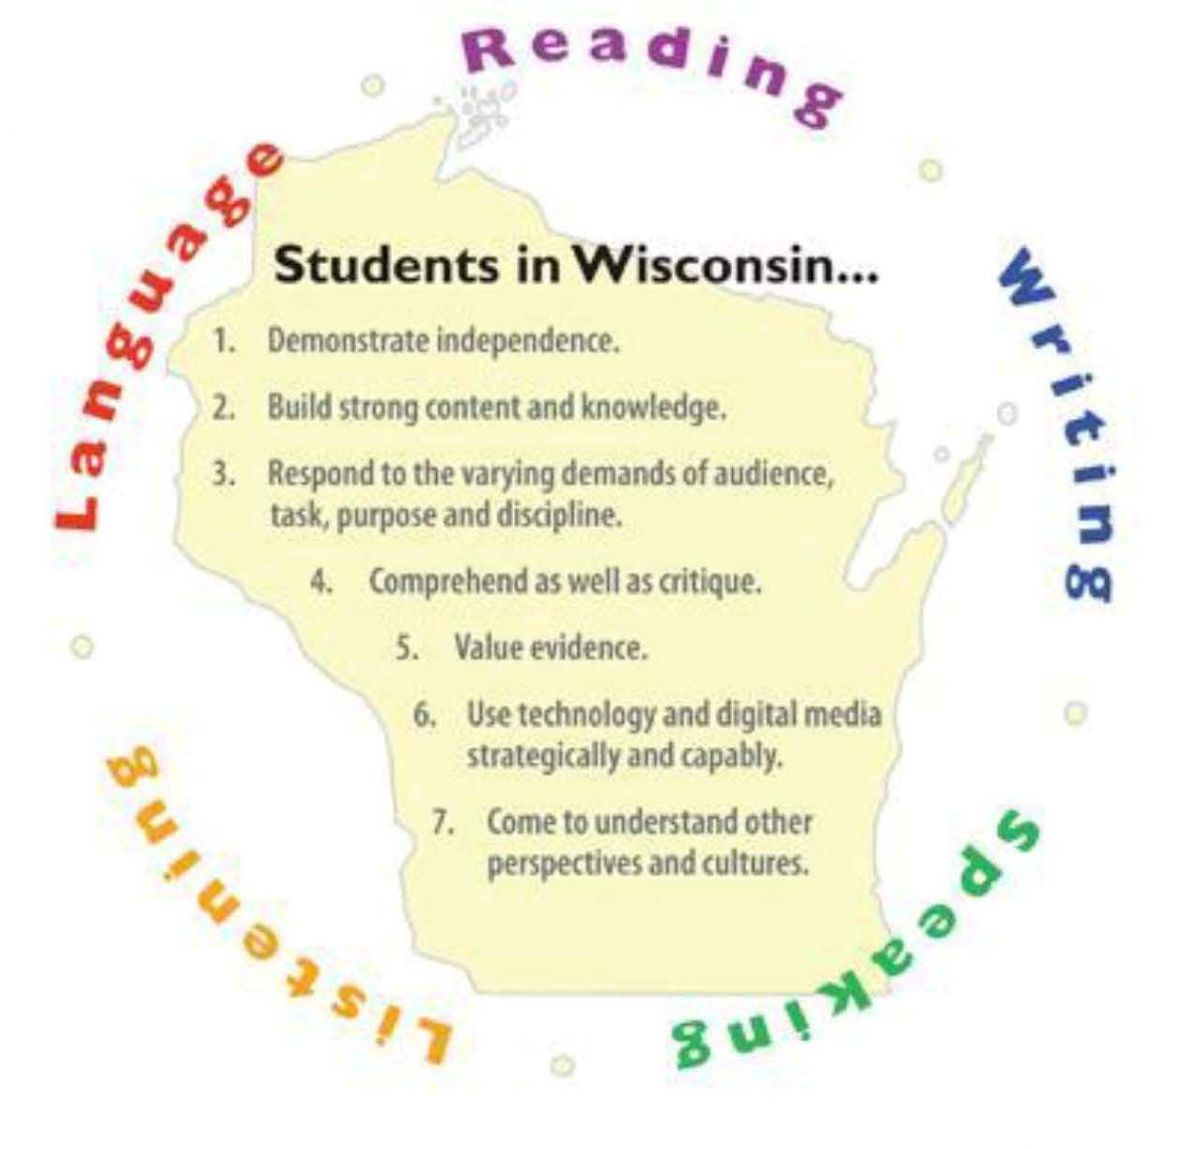 Students in Wisconsin graphic